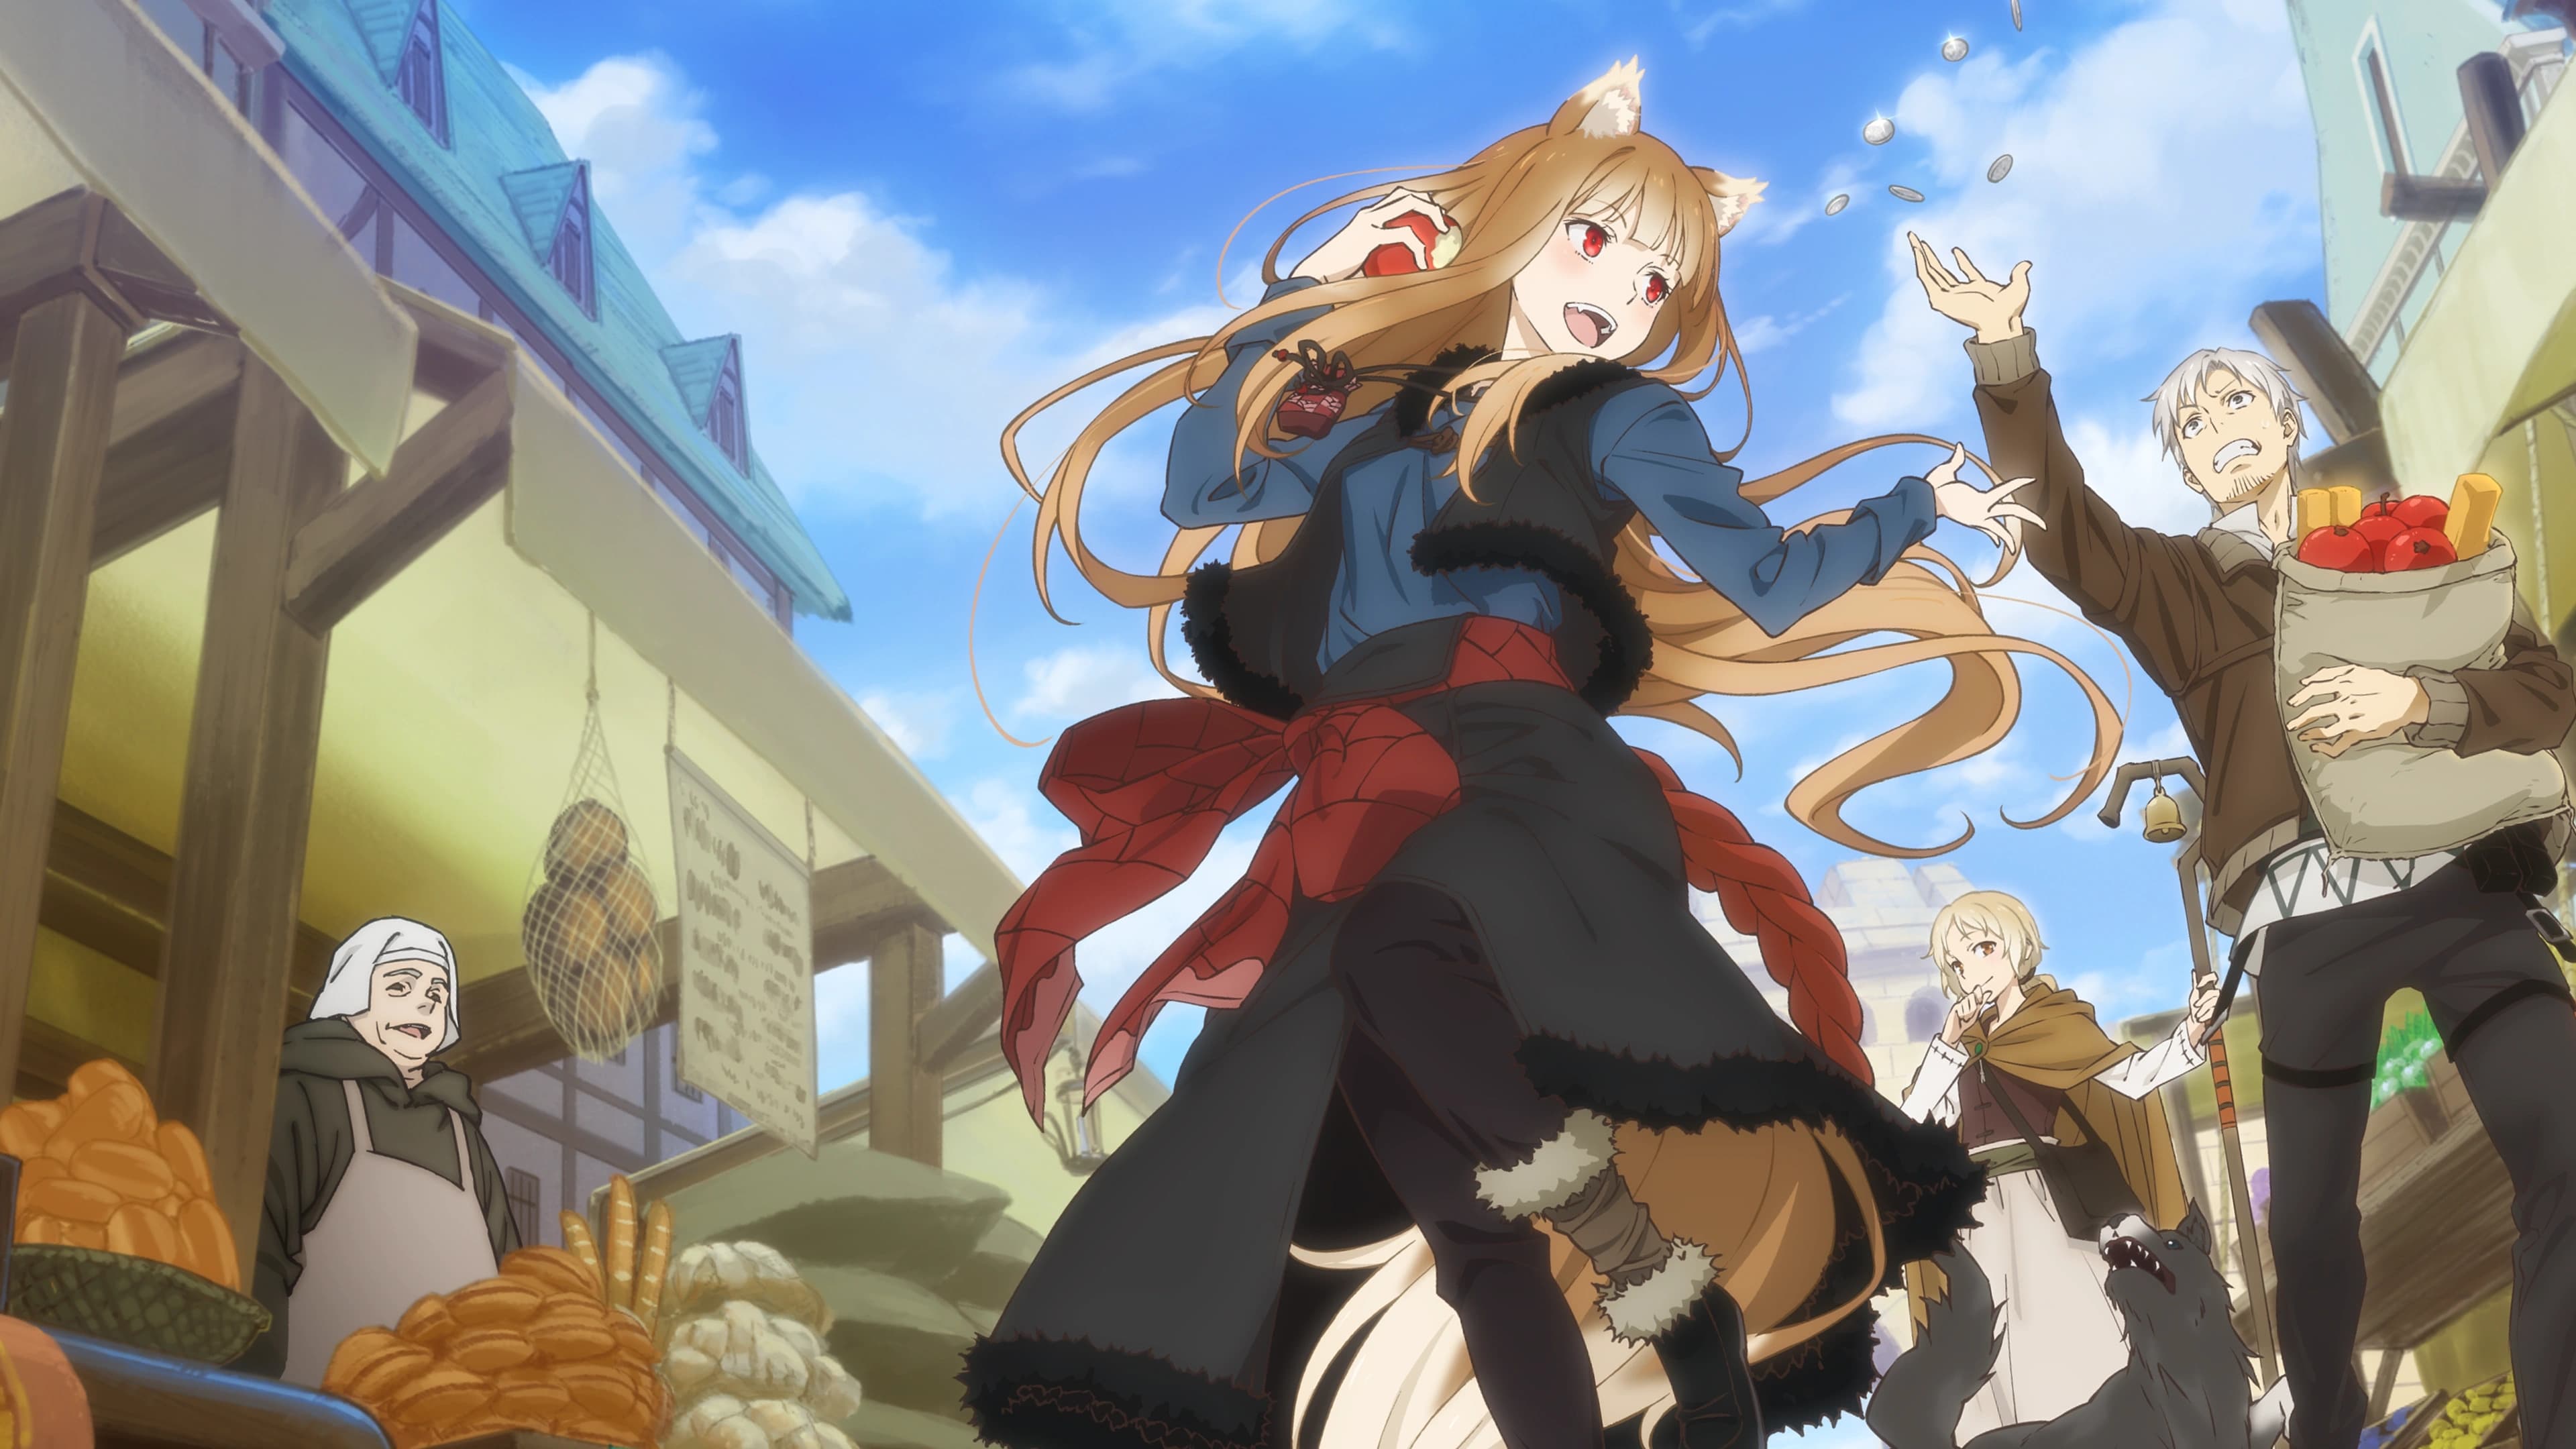 Spice and Wolf: Merchant Meets the Wise Wolf - Season 1 Episode 10